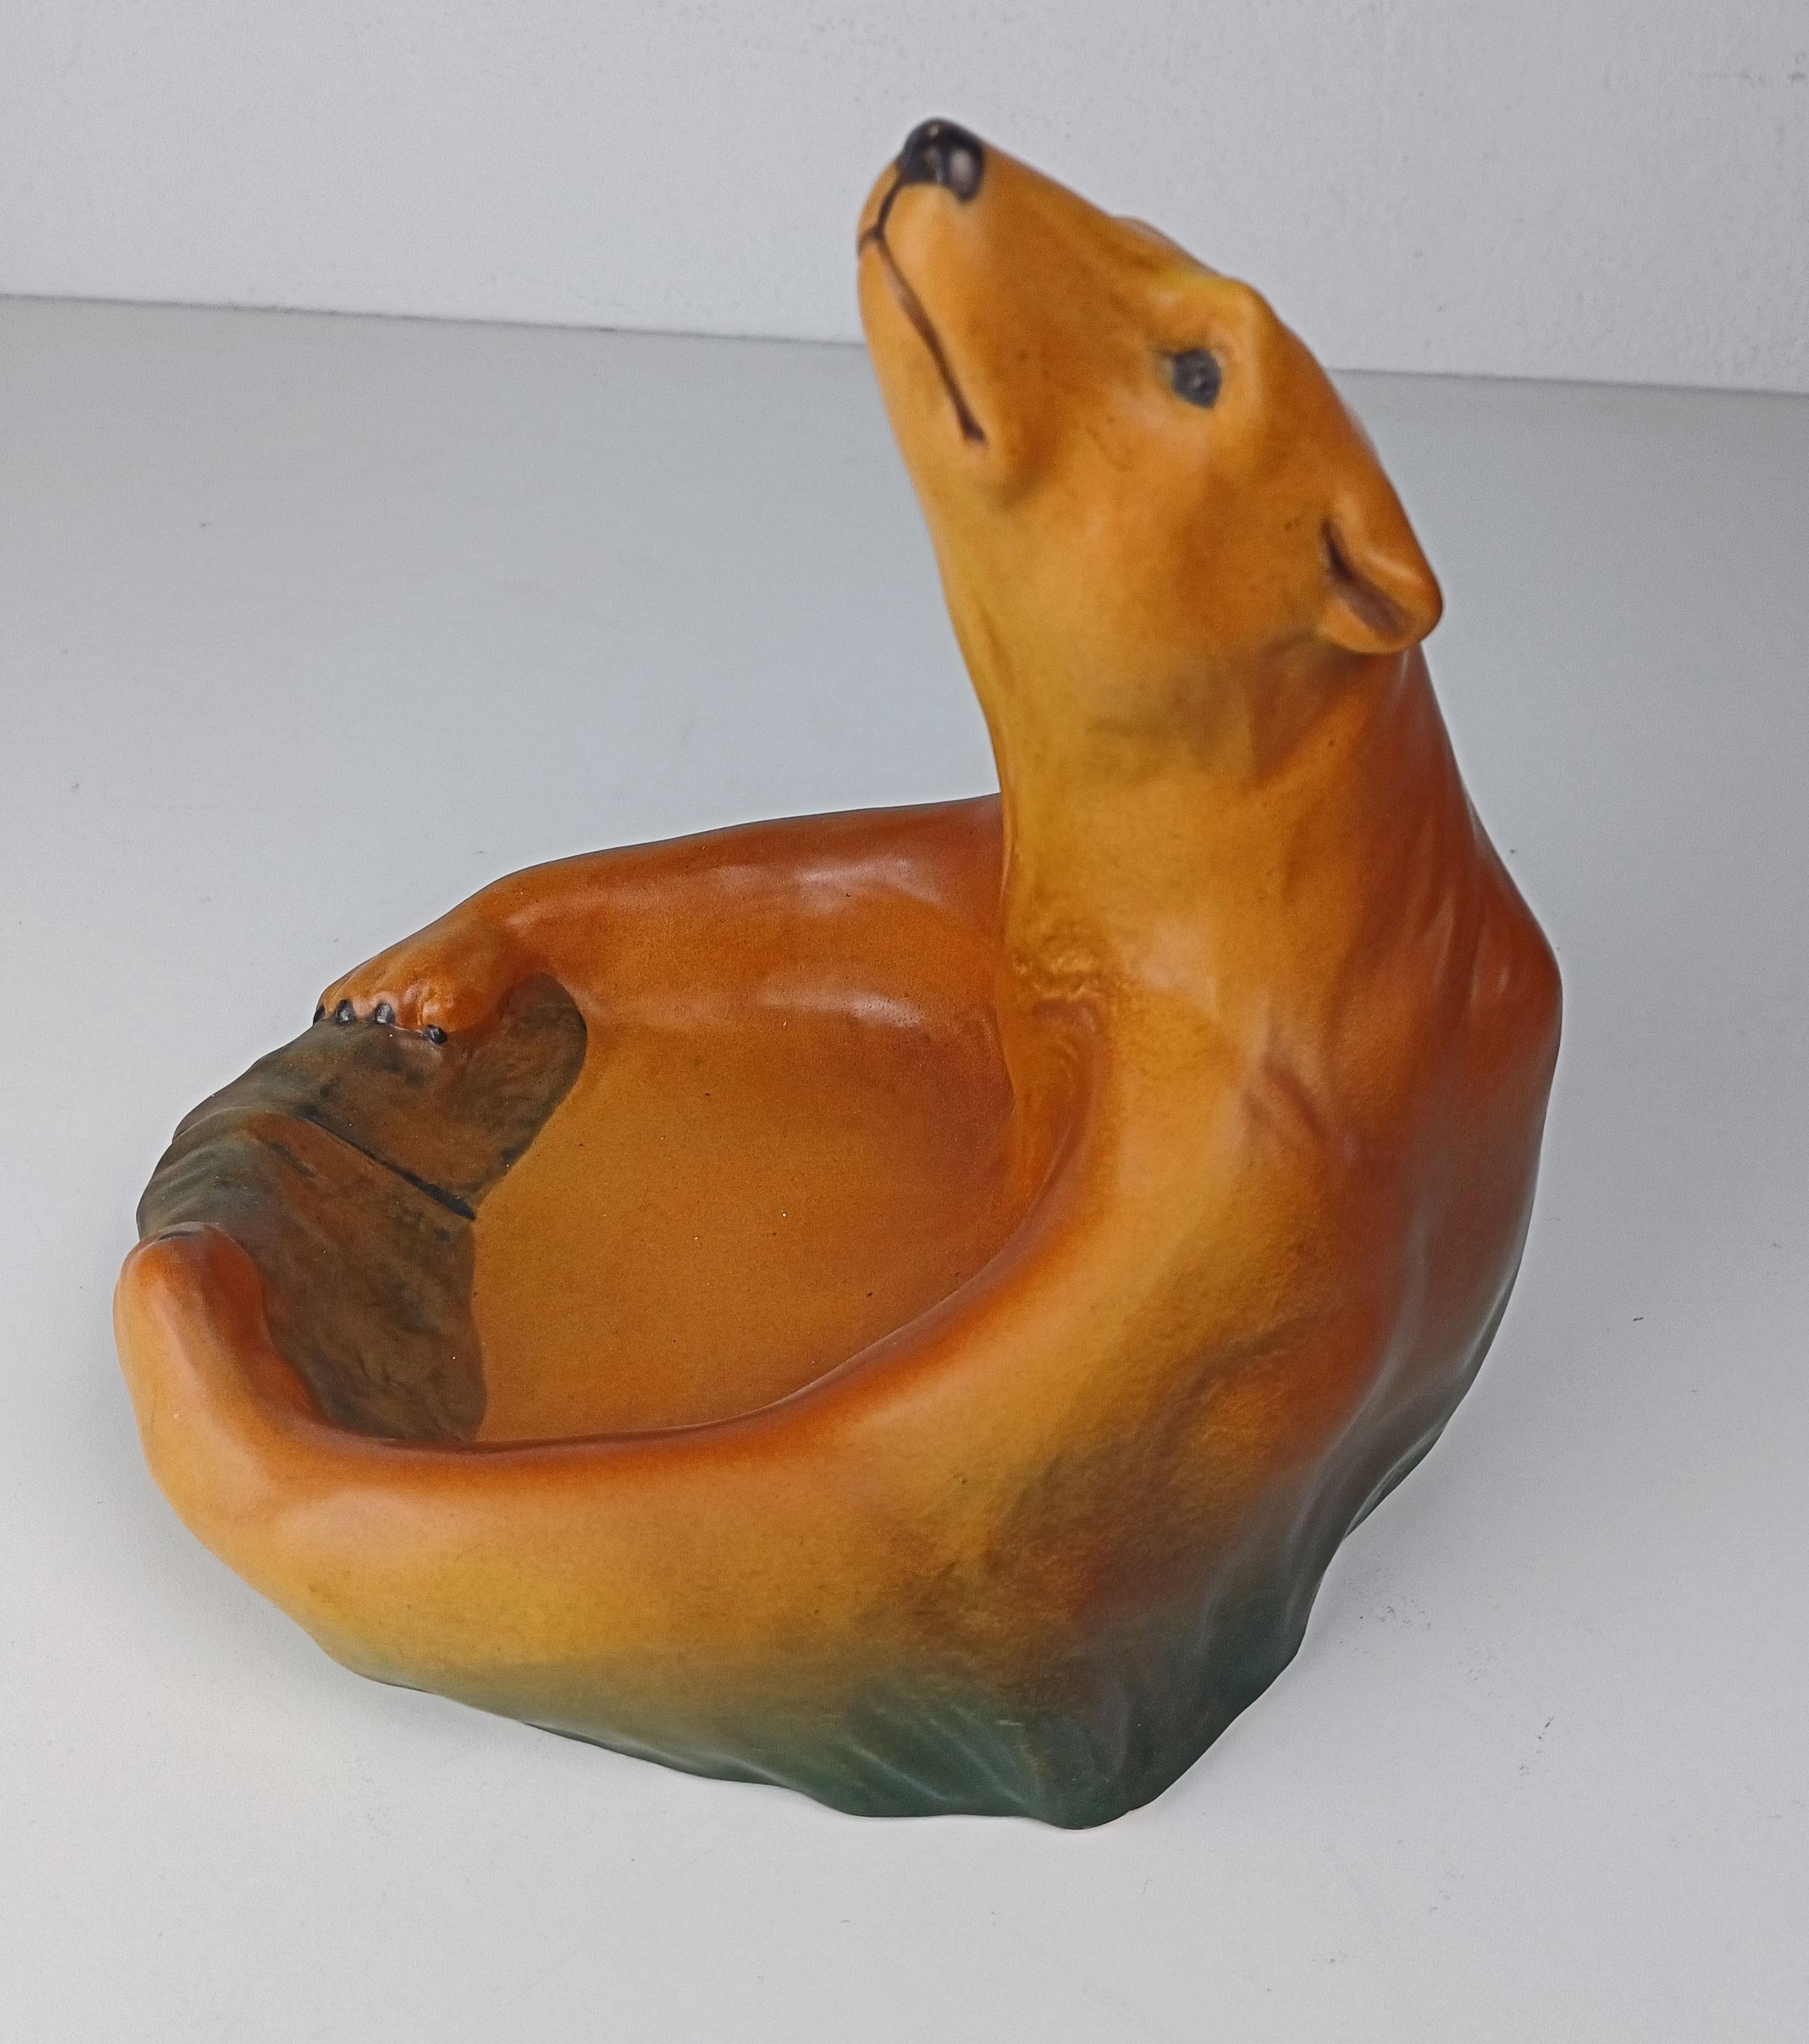 1920's Danish Art Nouveau Handcrafted Icebear Bowl - Ash Tray by P. Ipsens Enke In Good Condition For Sale In Knebel, DK